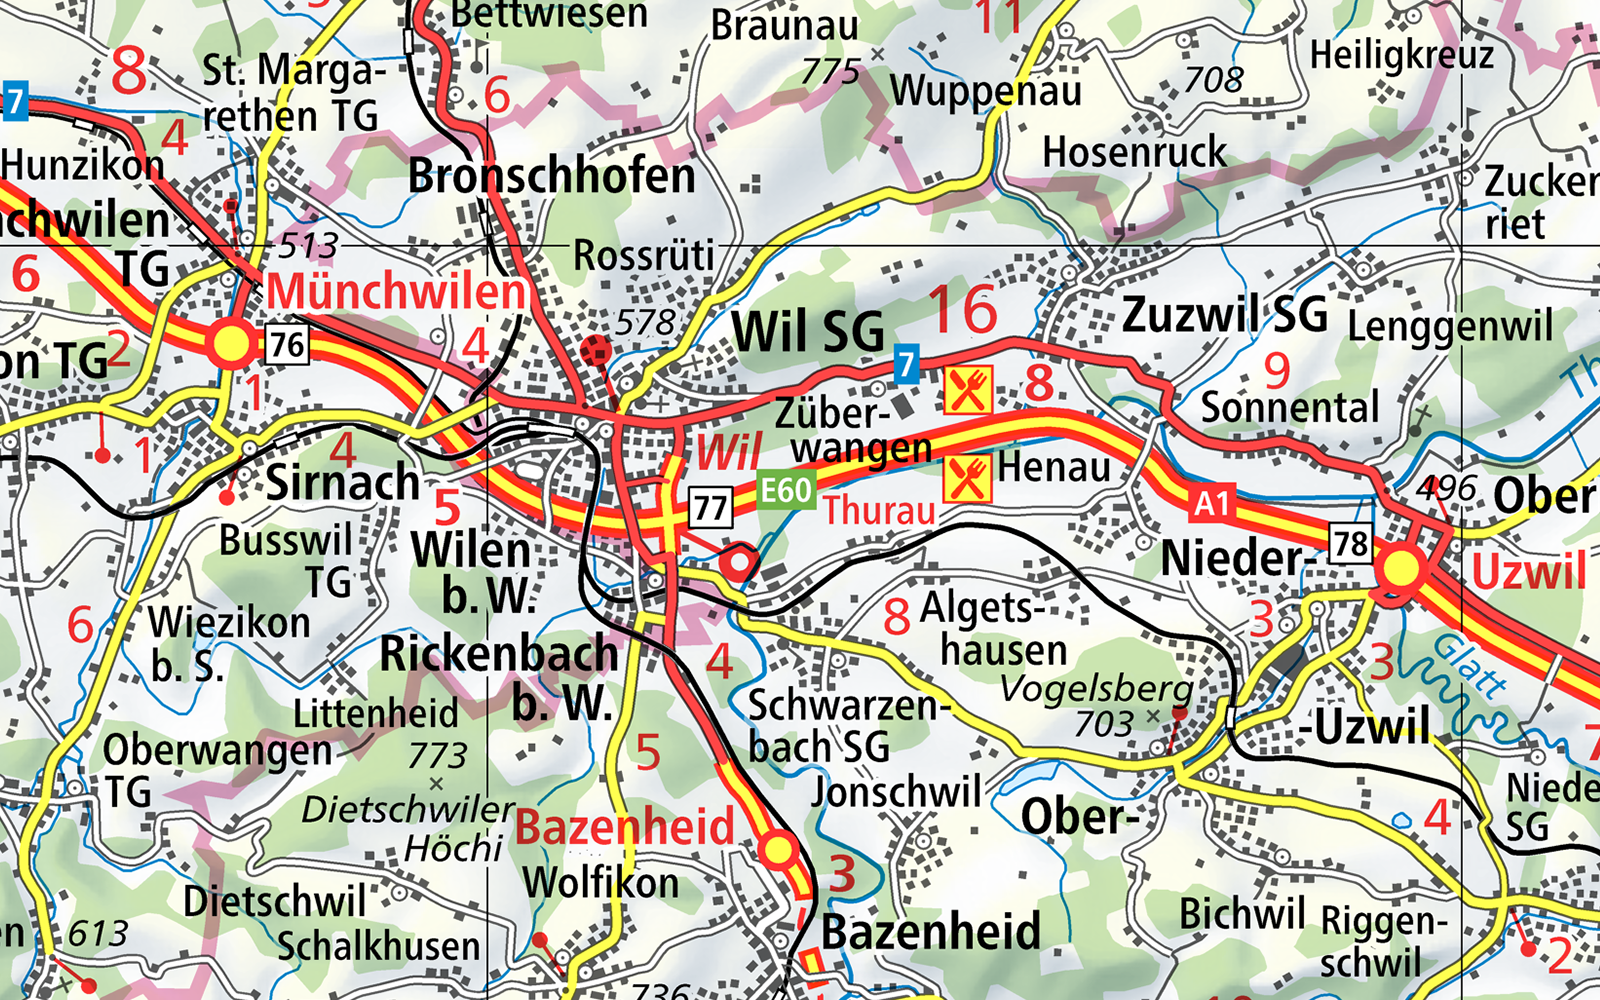 The picture shows a section of the road map with the surroundings of Wil SG